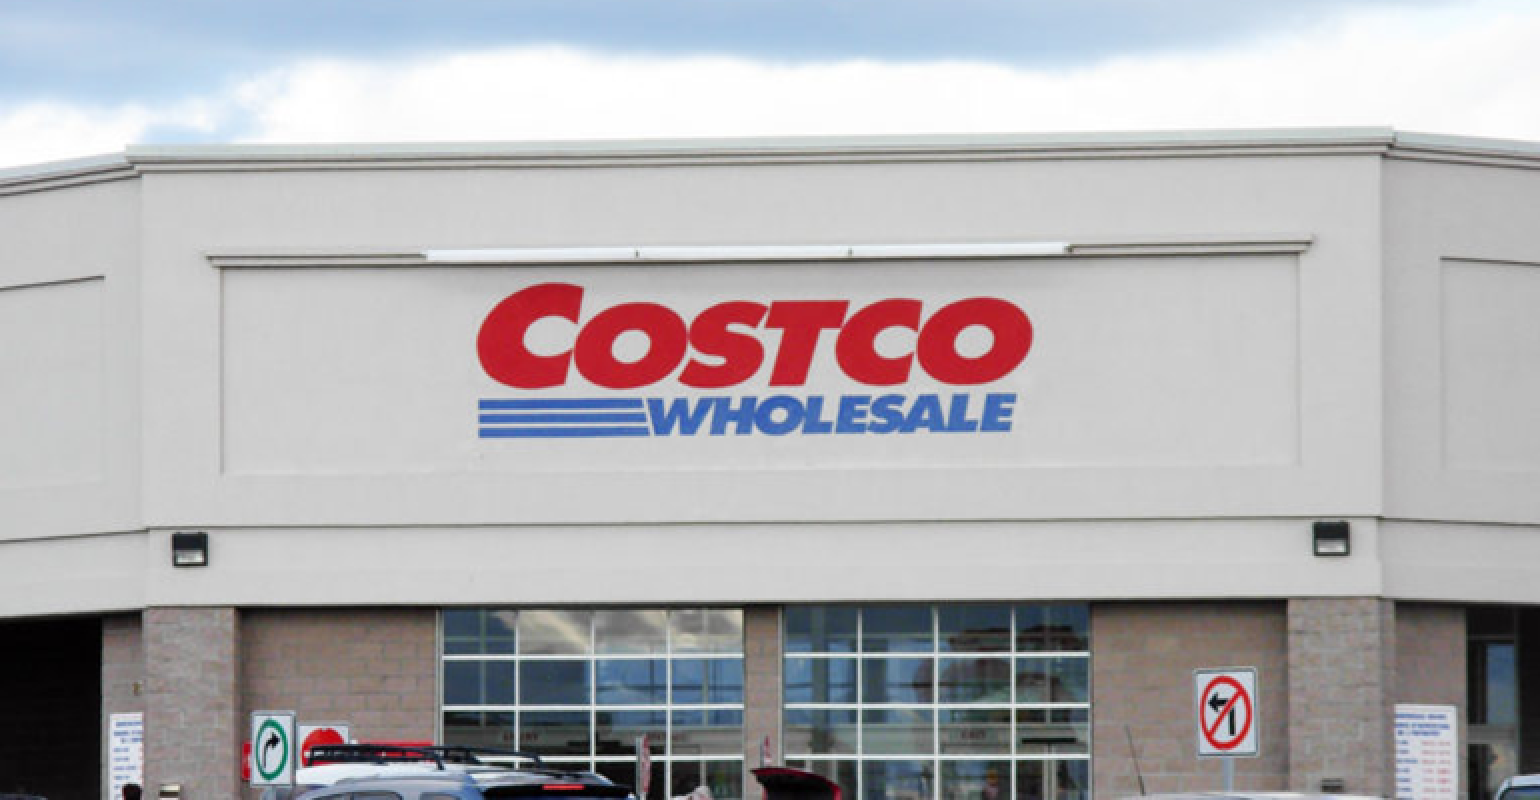 Costco’s top line grows by over 30 billion in fiscal 2022